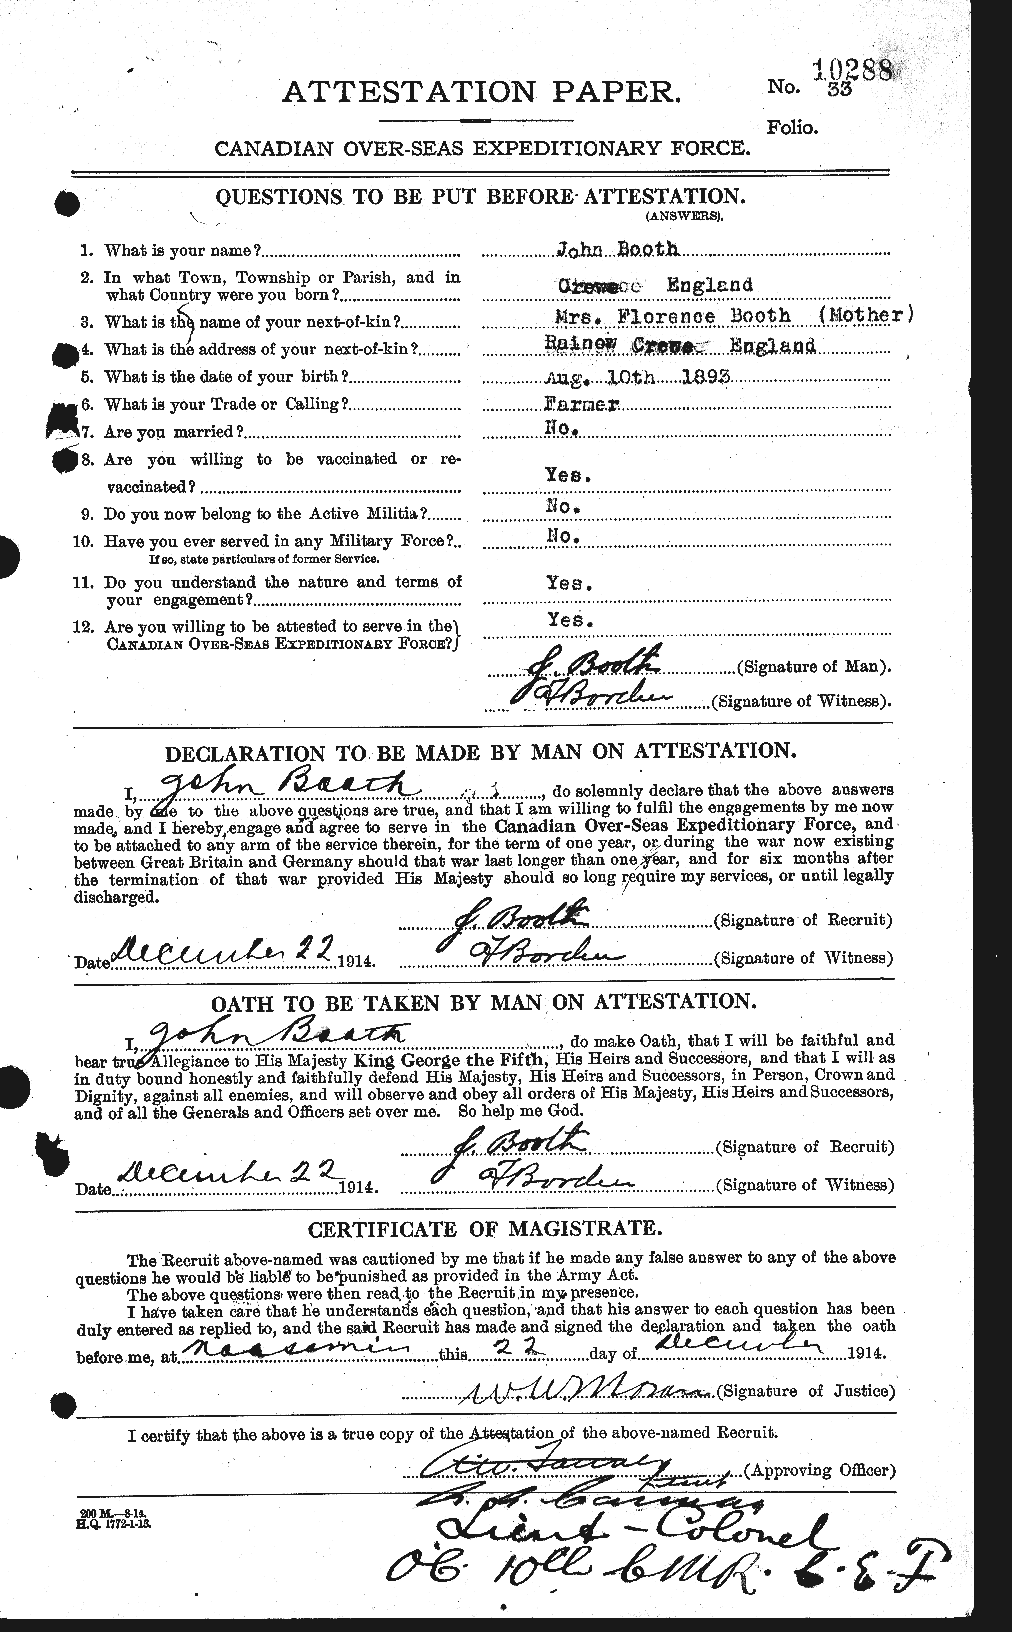 Personnel Records of the First World War - CEF 250920a